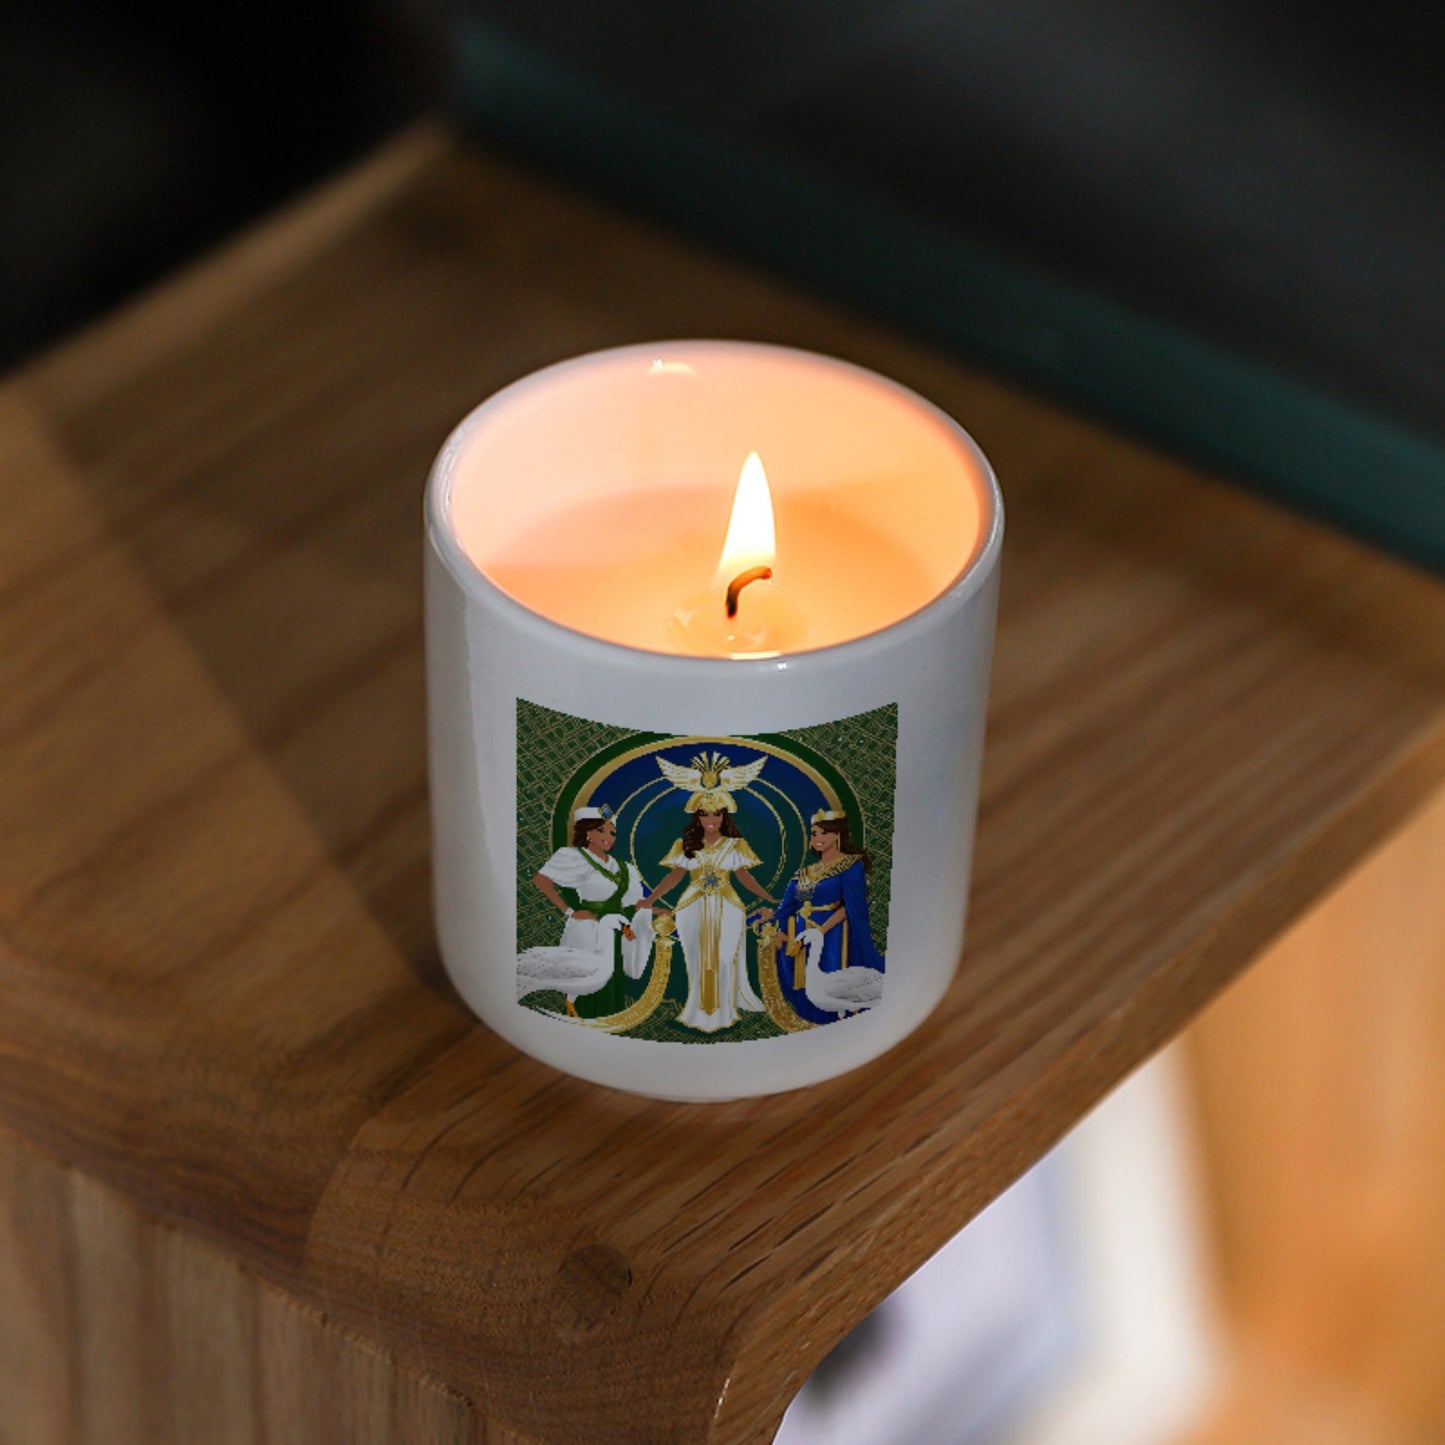 AGXi Scented Candle